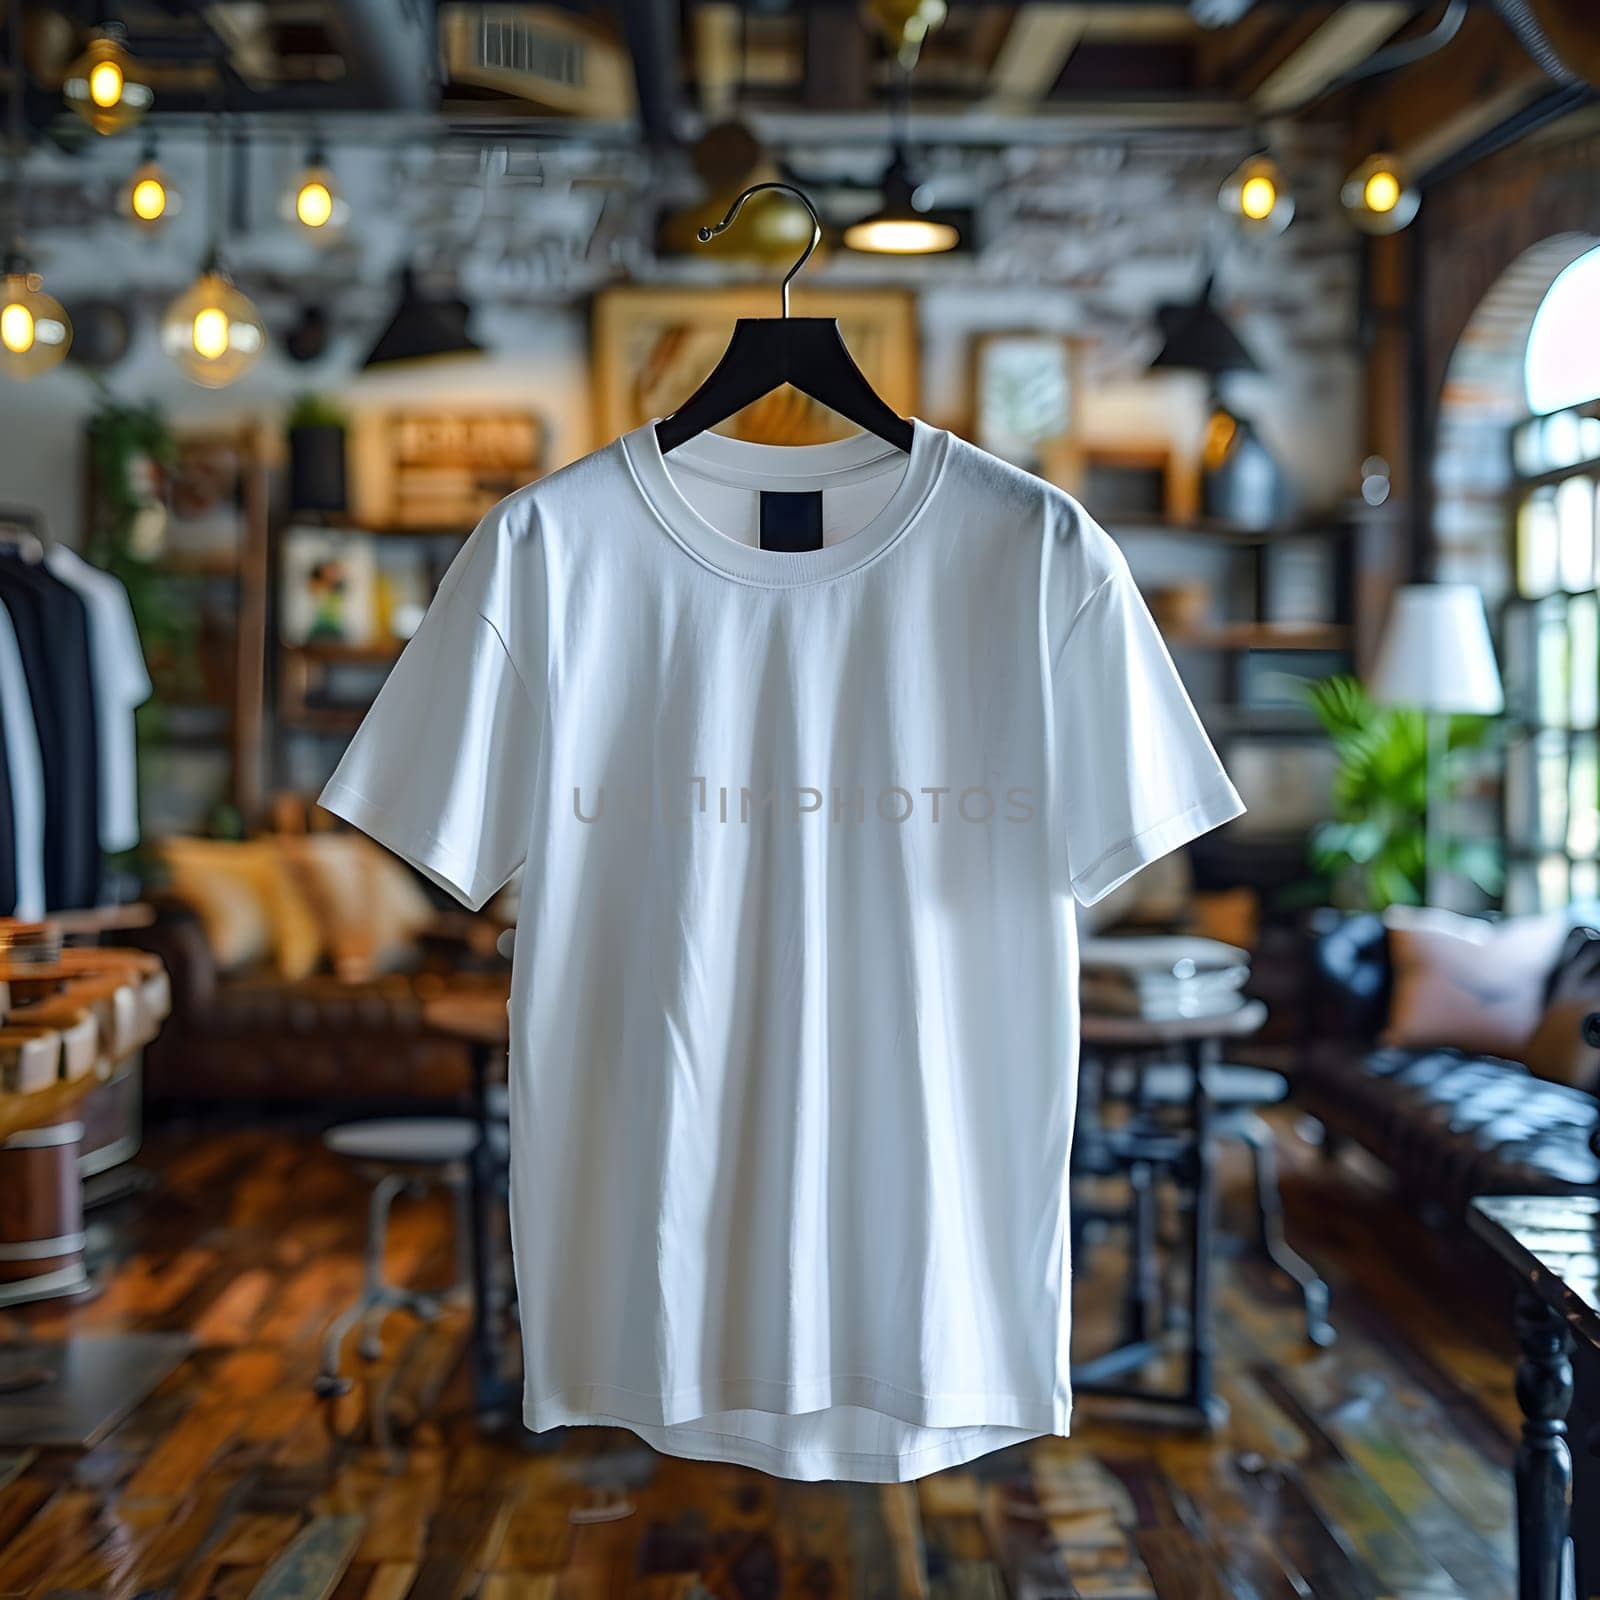 A Jersey white sleeve tshirt is hanging in a room, adding a touch of fashion design. It could be worn as part of a uniform or for a formal event